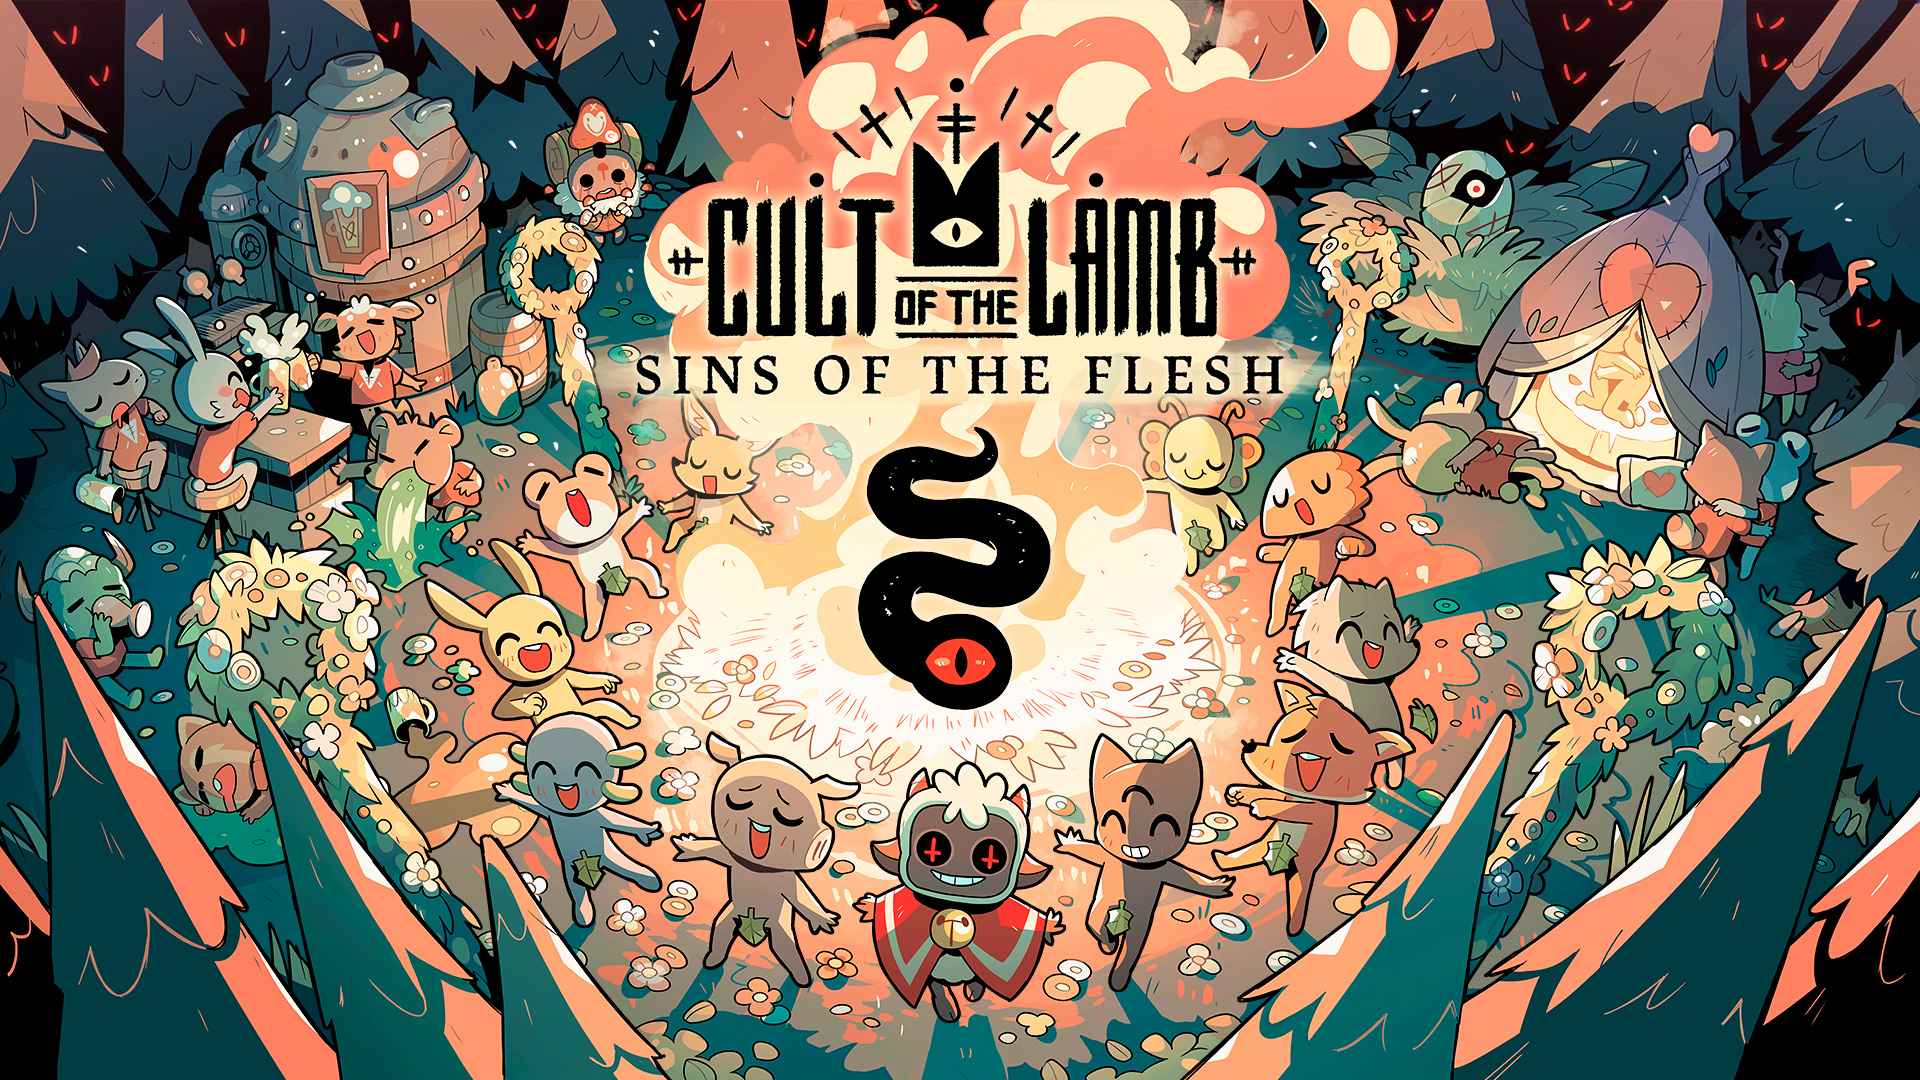 Cult-of-the-lamb sins of the flesh